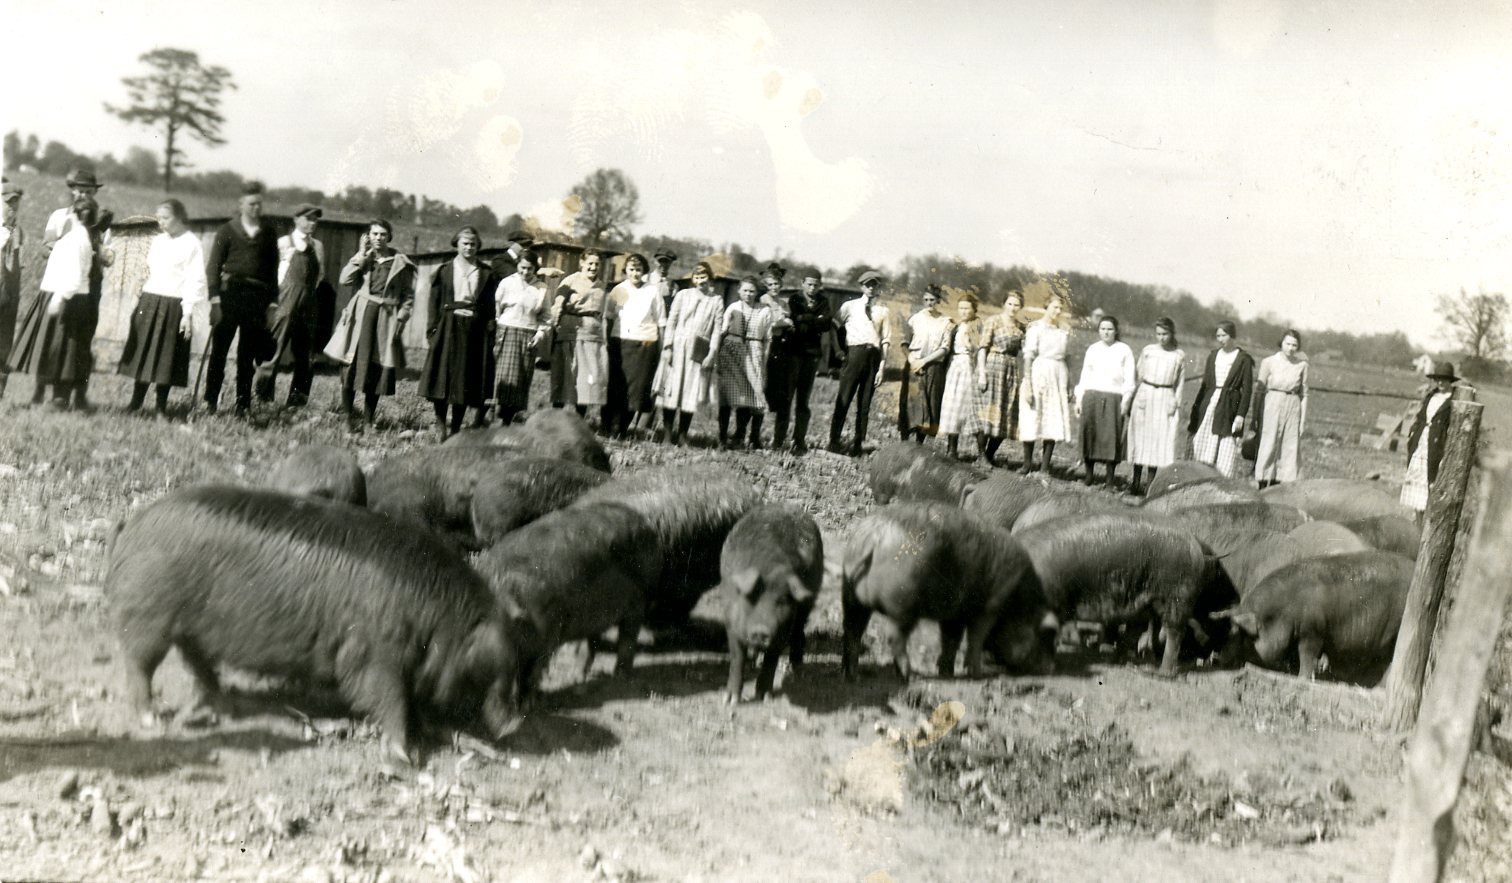 A group of people outside observing hogs on the Farm